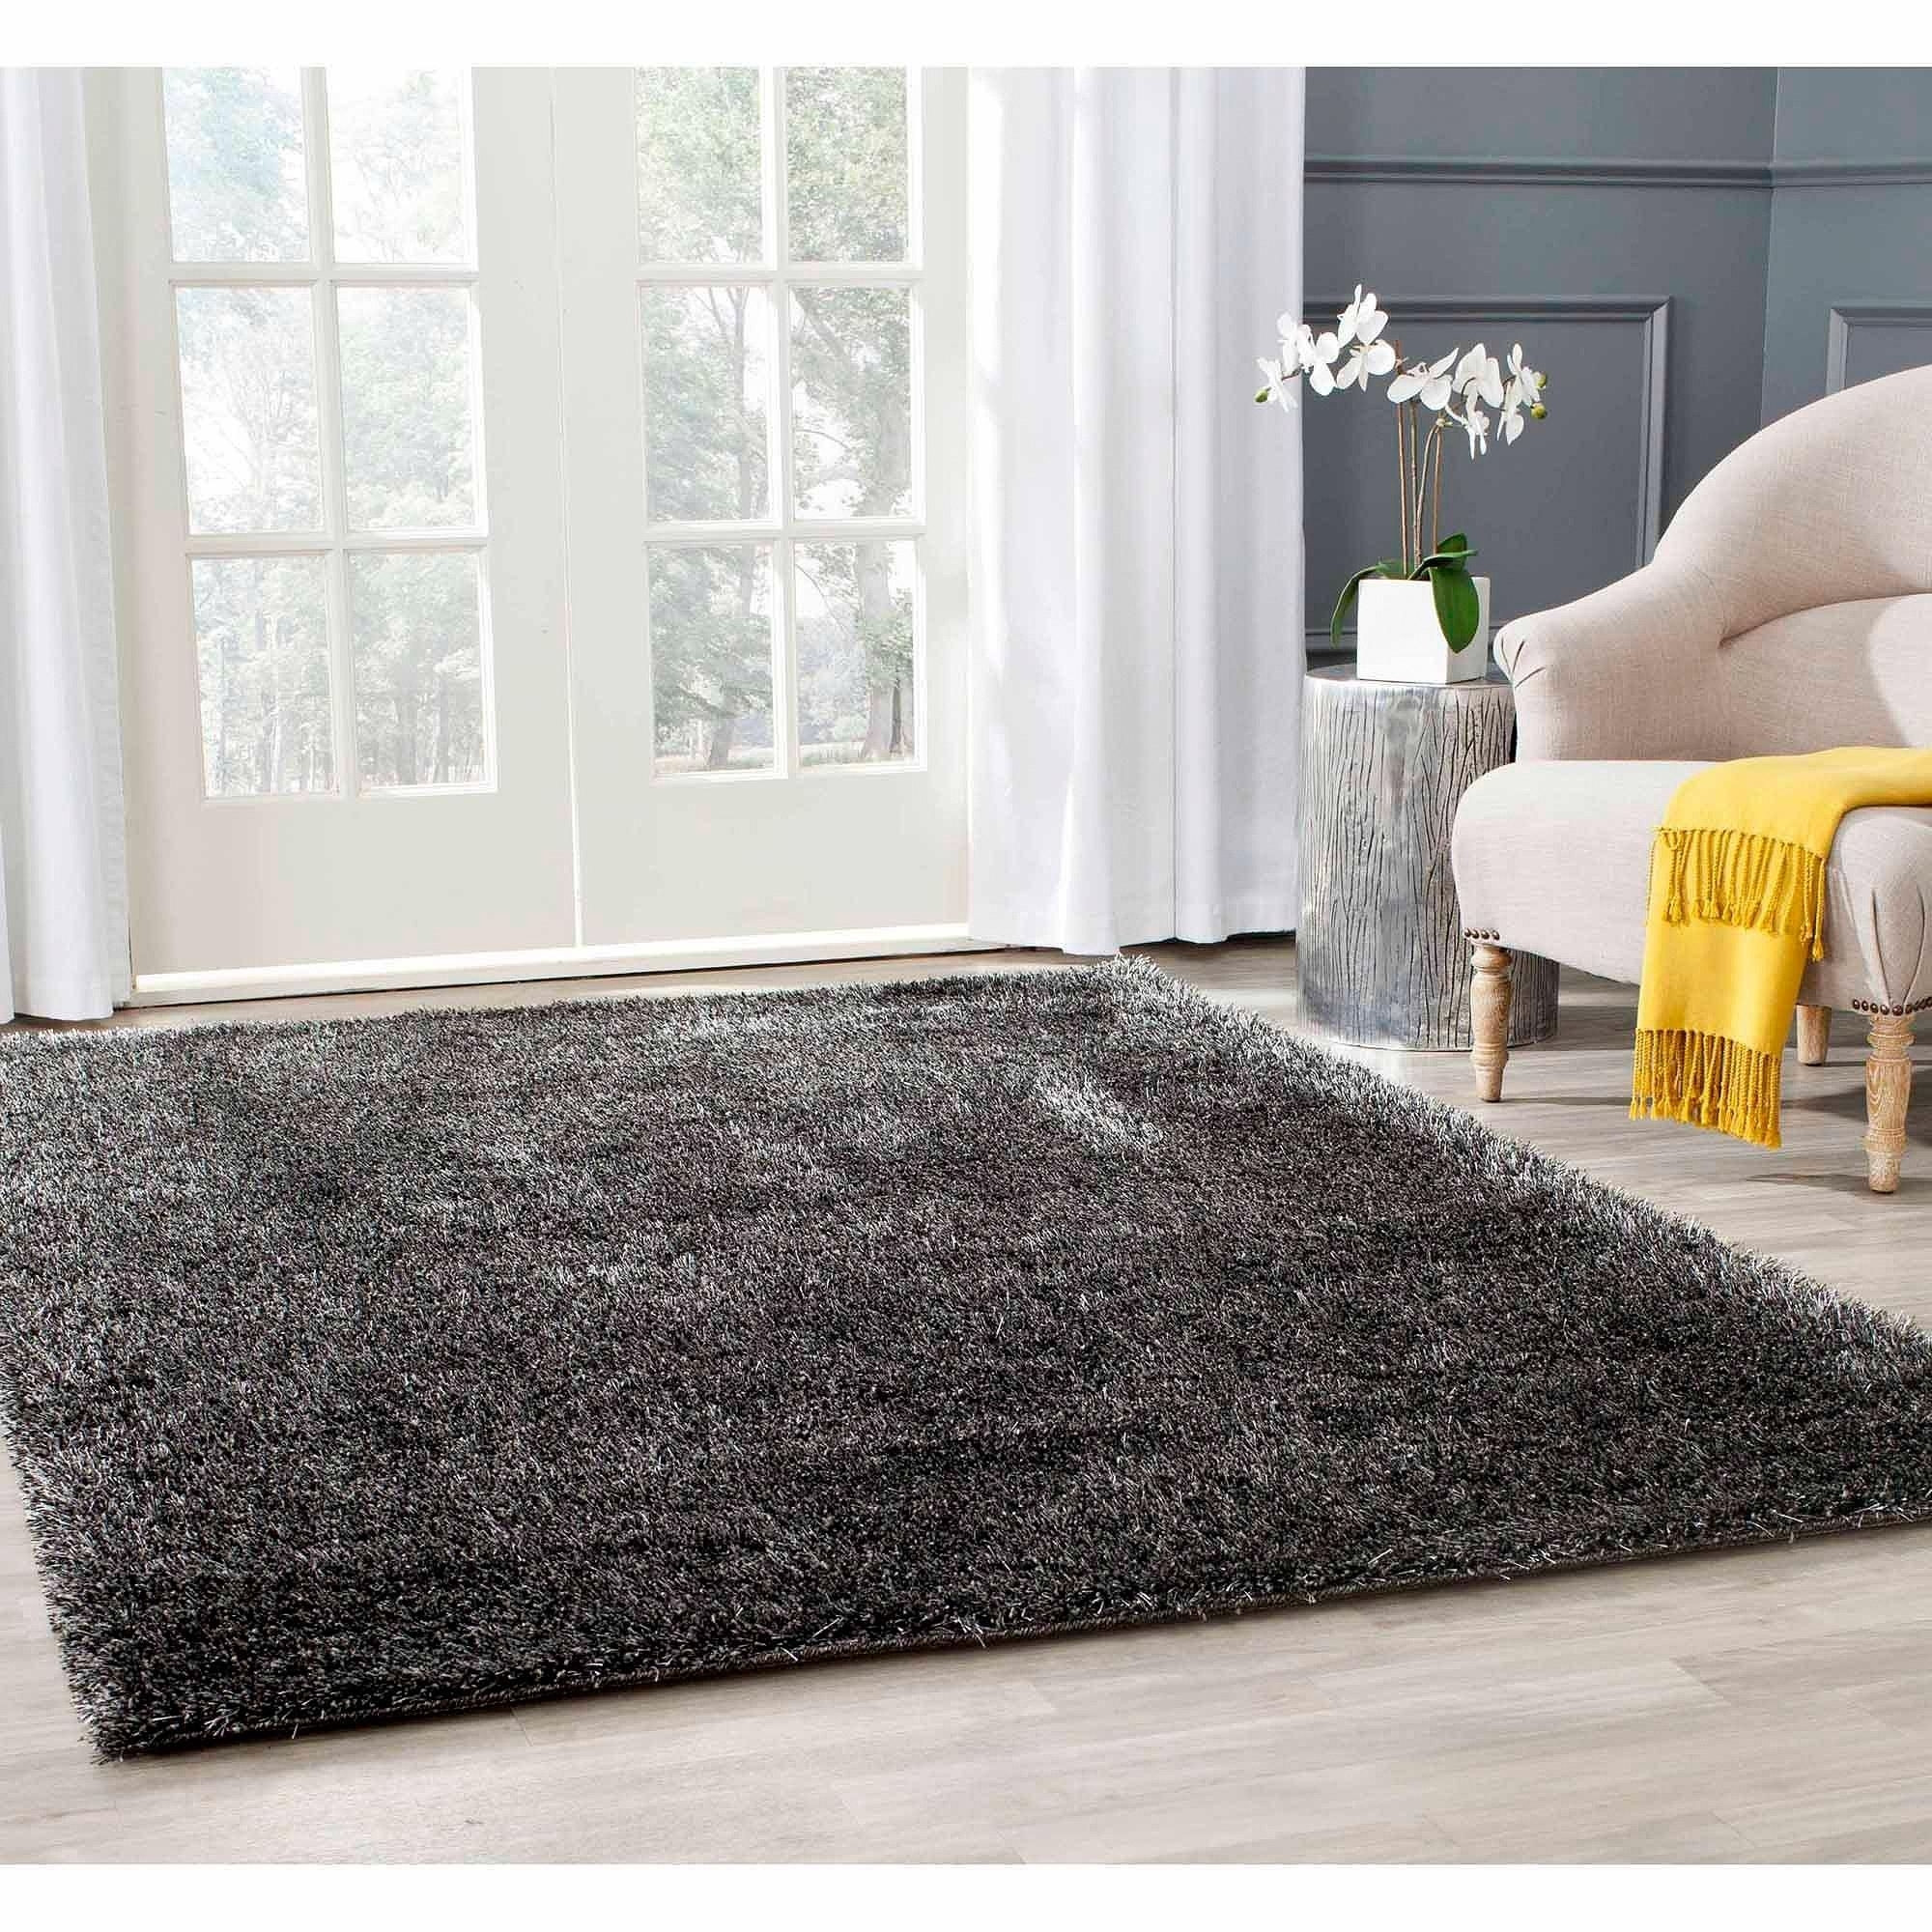 Rugs For Living Room Cheap
 Top 15 Cheap Silver Rugs